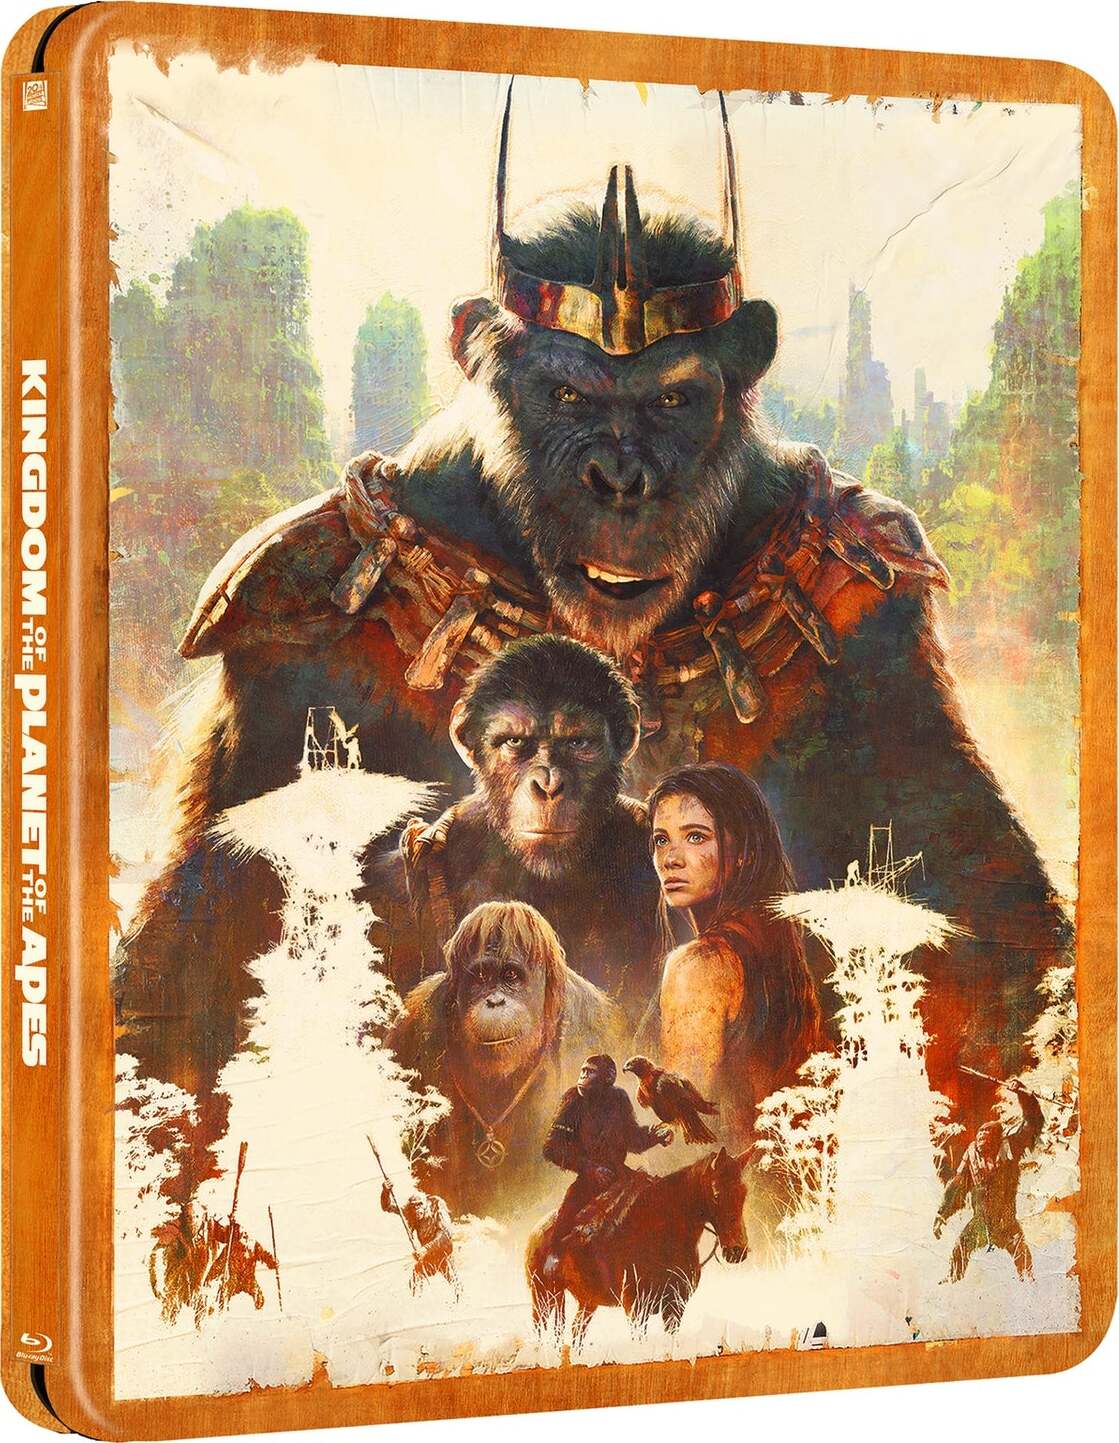 Kingdom of the Planet of the Apes [Steelbook] [4K UHD] [UK]